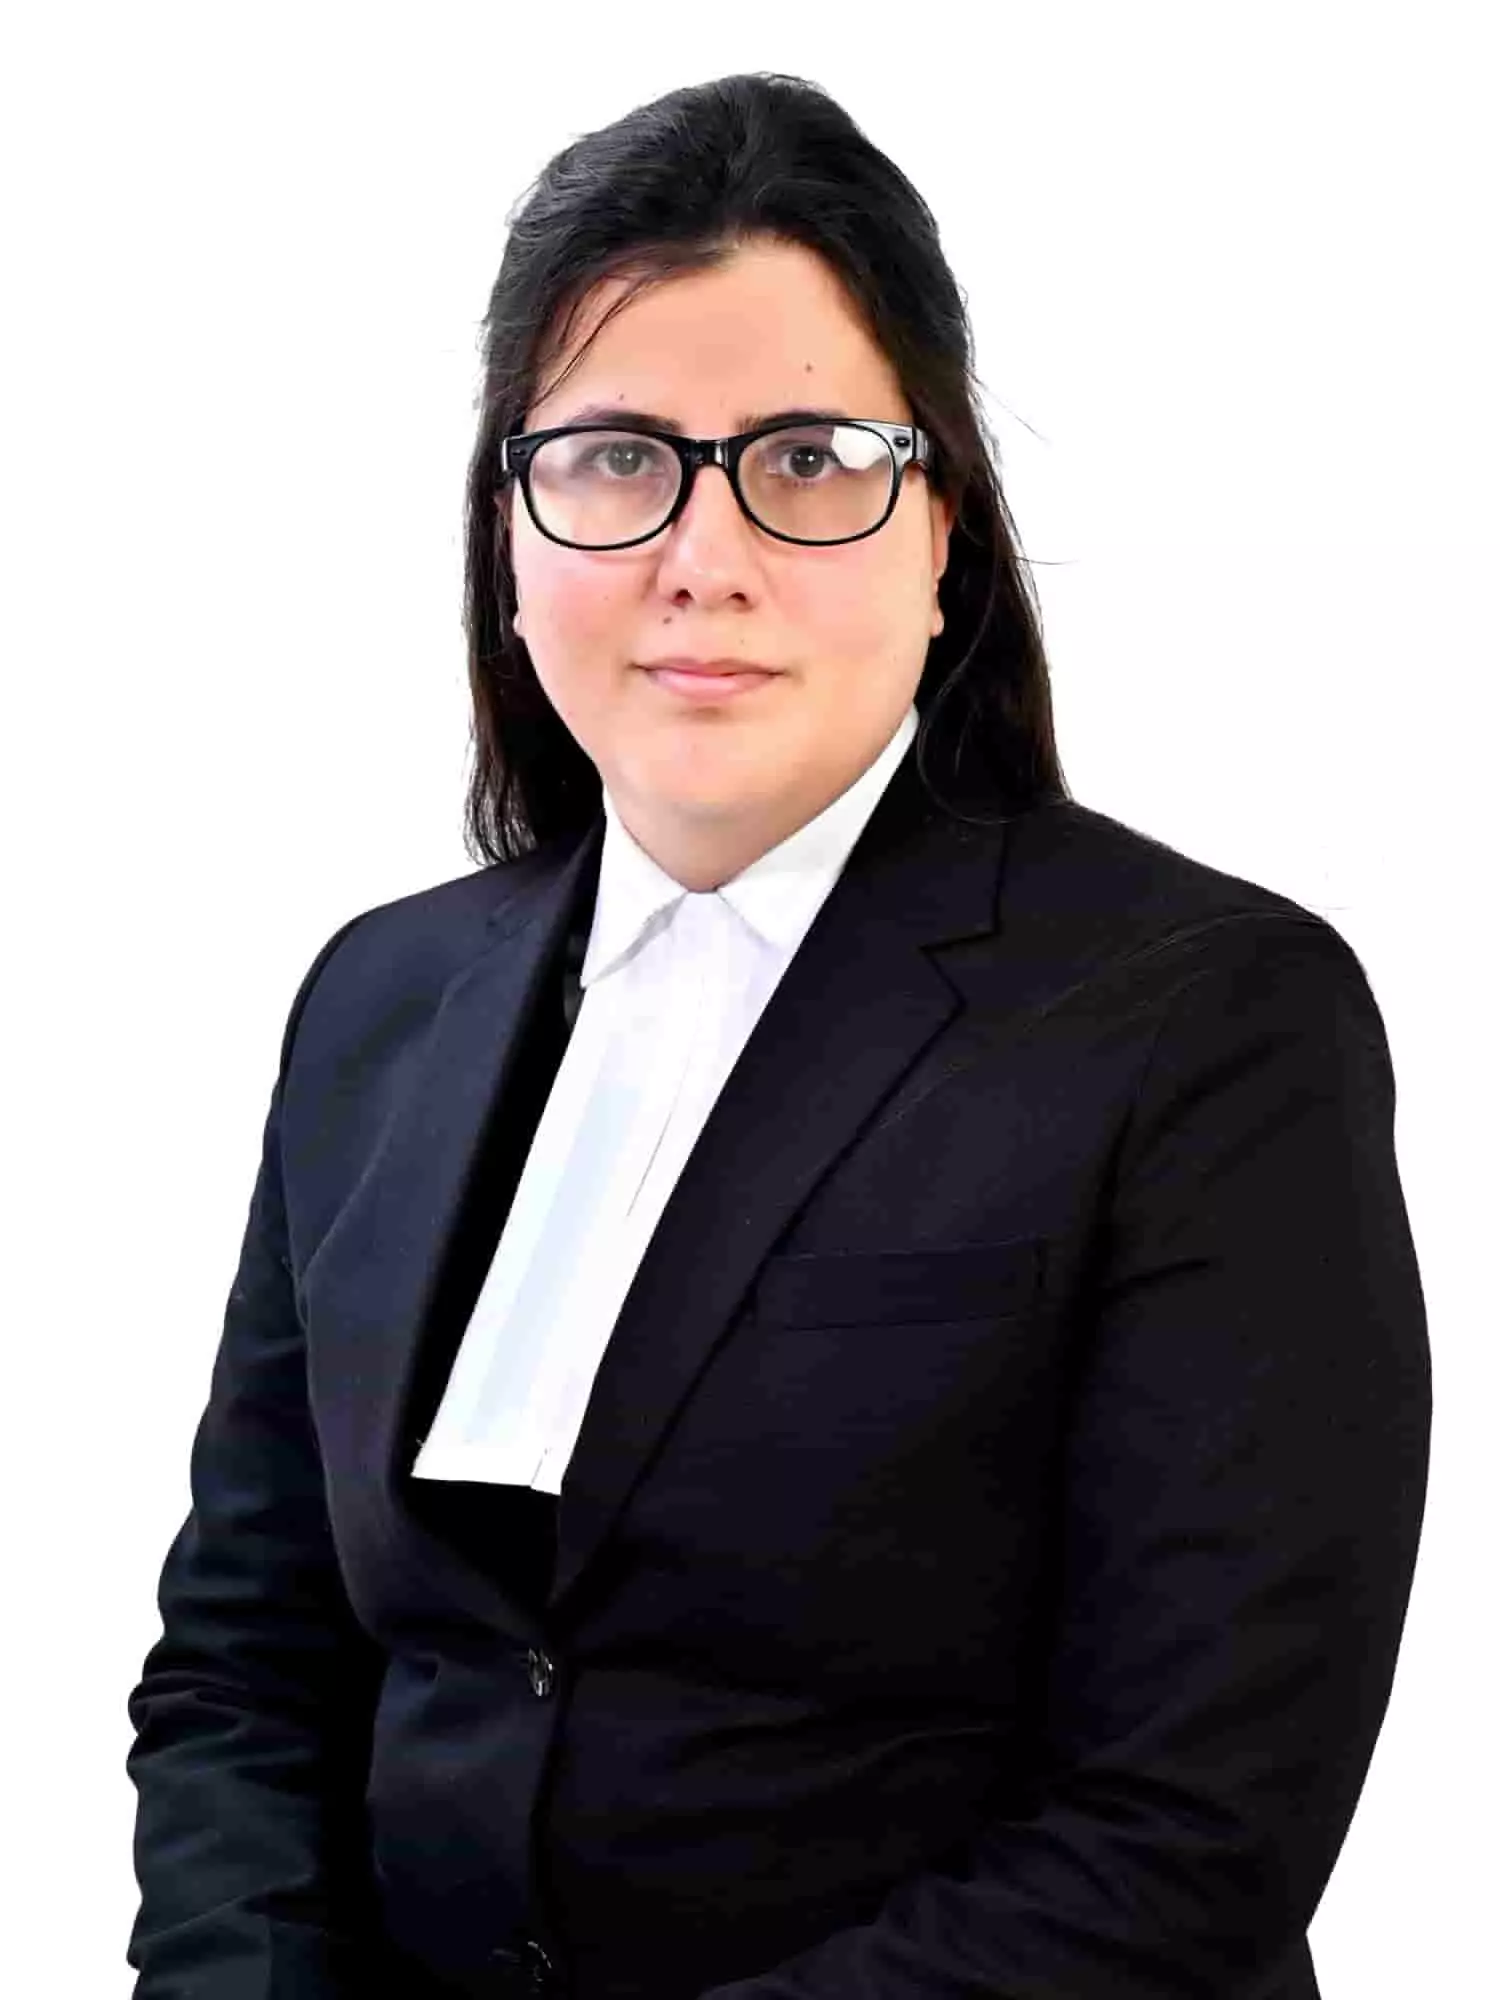 corporate lawyer